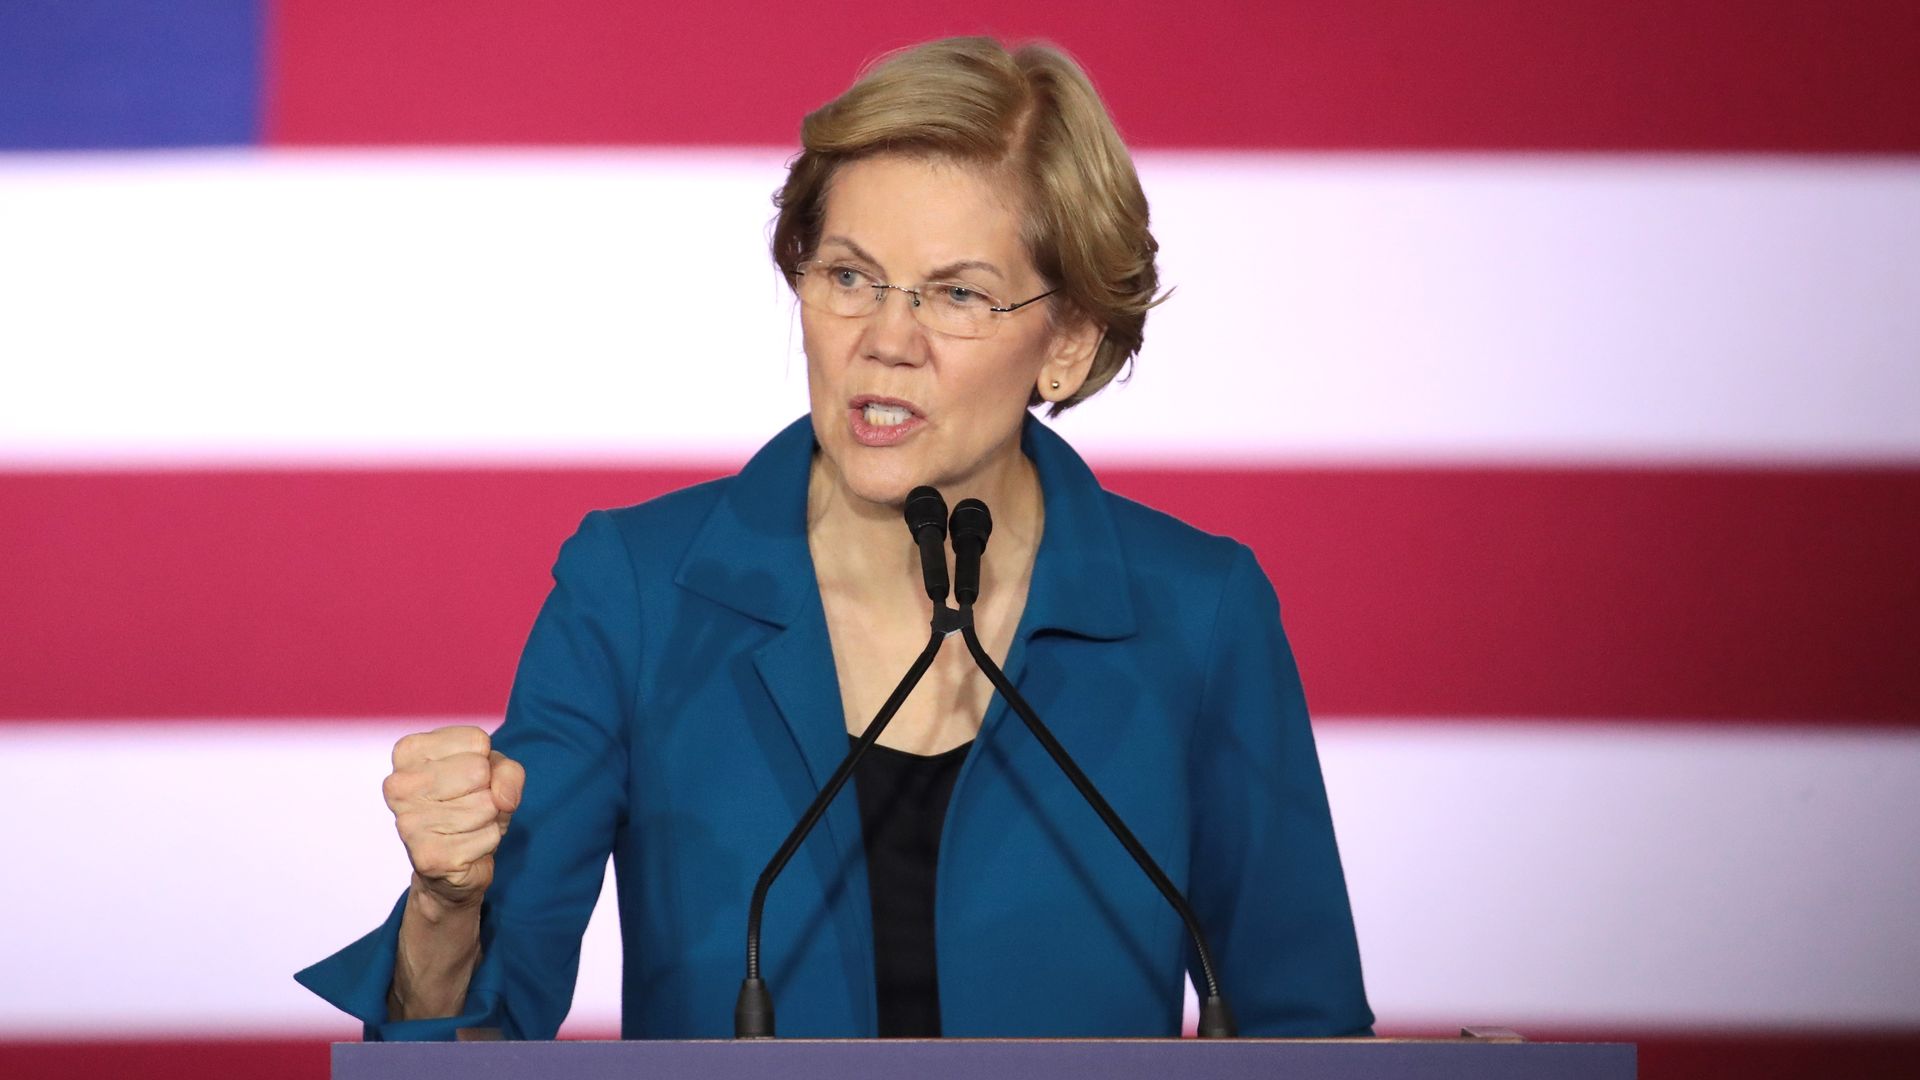 Democratic presidential candidate Sen. Elizabeth Warren (D-MA) speaks at her primary night event on February 11, 2020 in Manchester, New Hampshire.